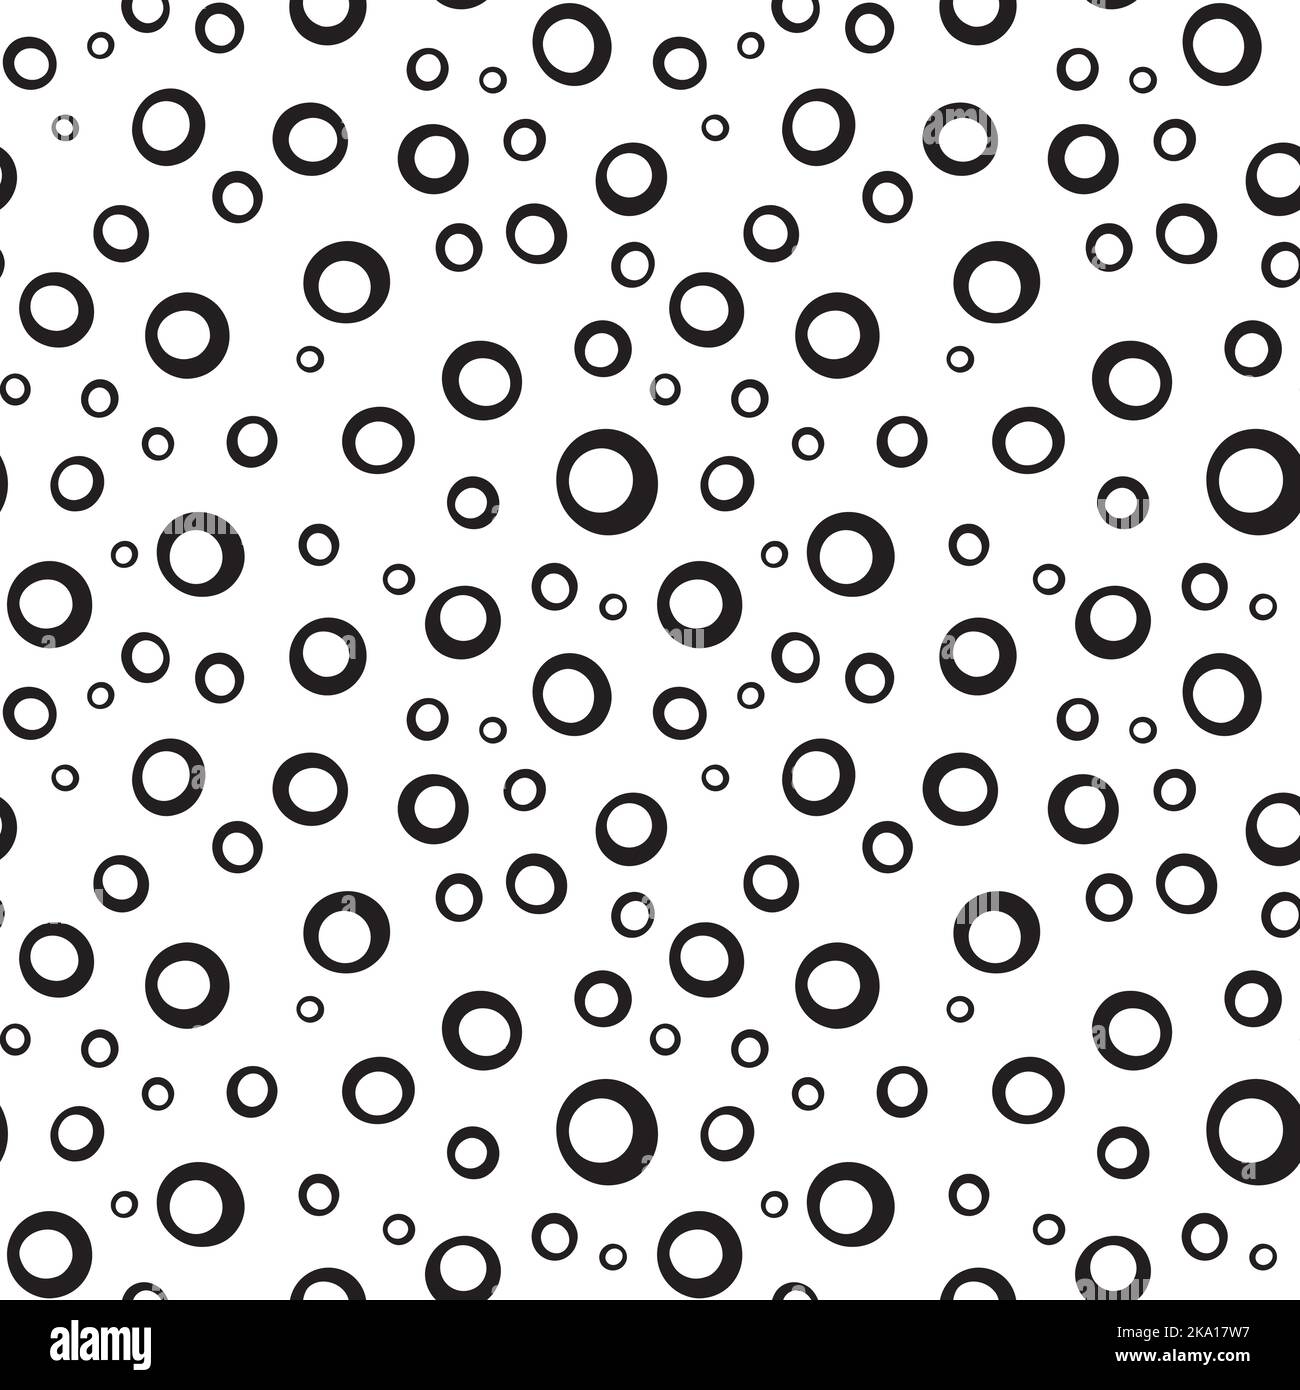 Abstract dotted bubble pattern background. Fun seamless repeat design ...